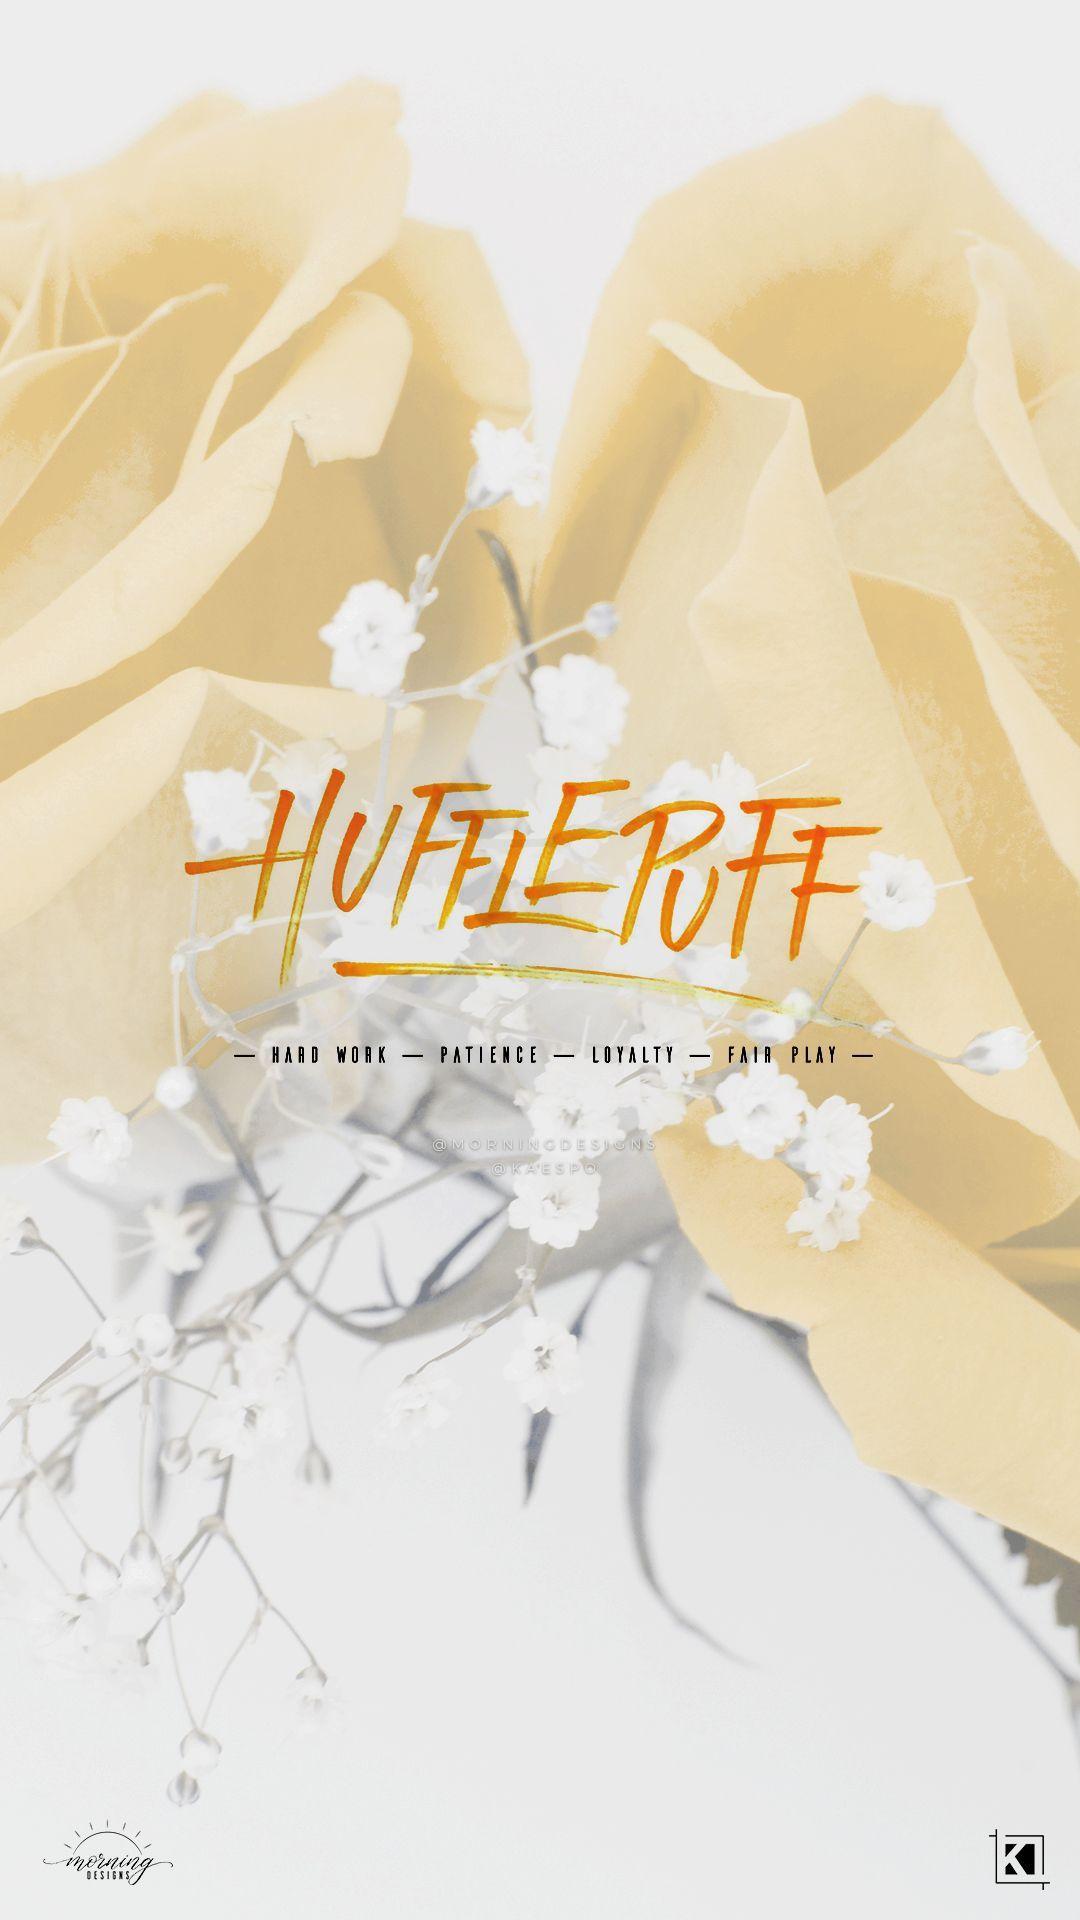 Hufflepuff Aesthetic Wallpapers Top Free Hufflepuff Aesthetic Backgrounds Wallpaperaccess Turn your phone screen into a battleground. hufflepuff aesthetic wallpapers top